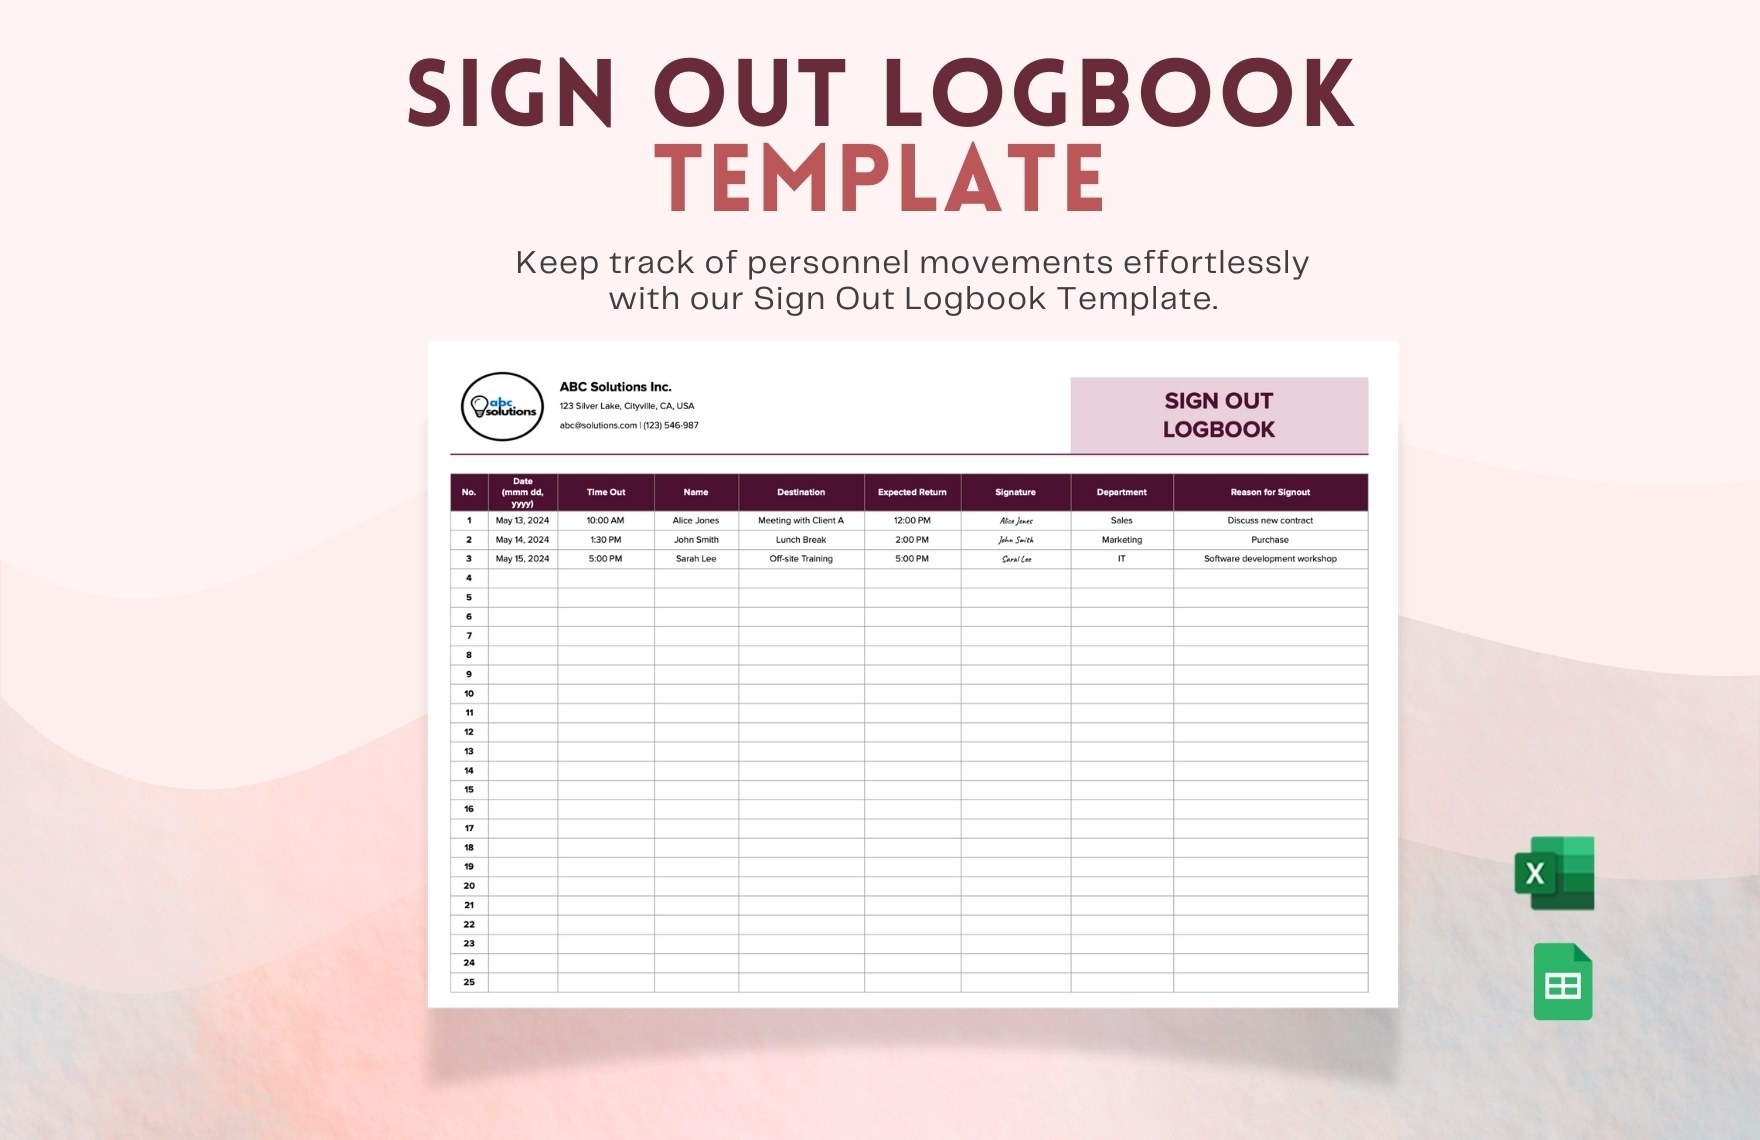 Sign Out Logbook Template